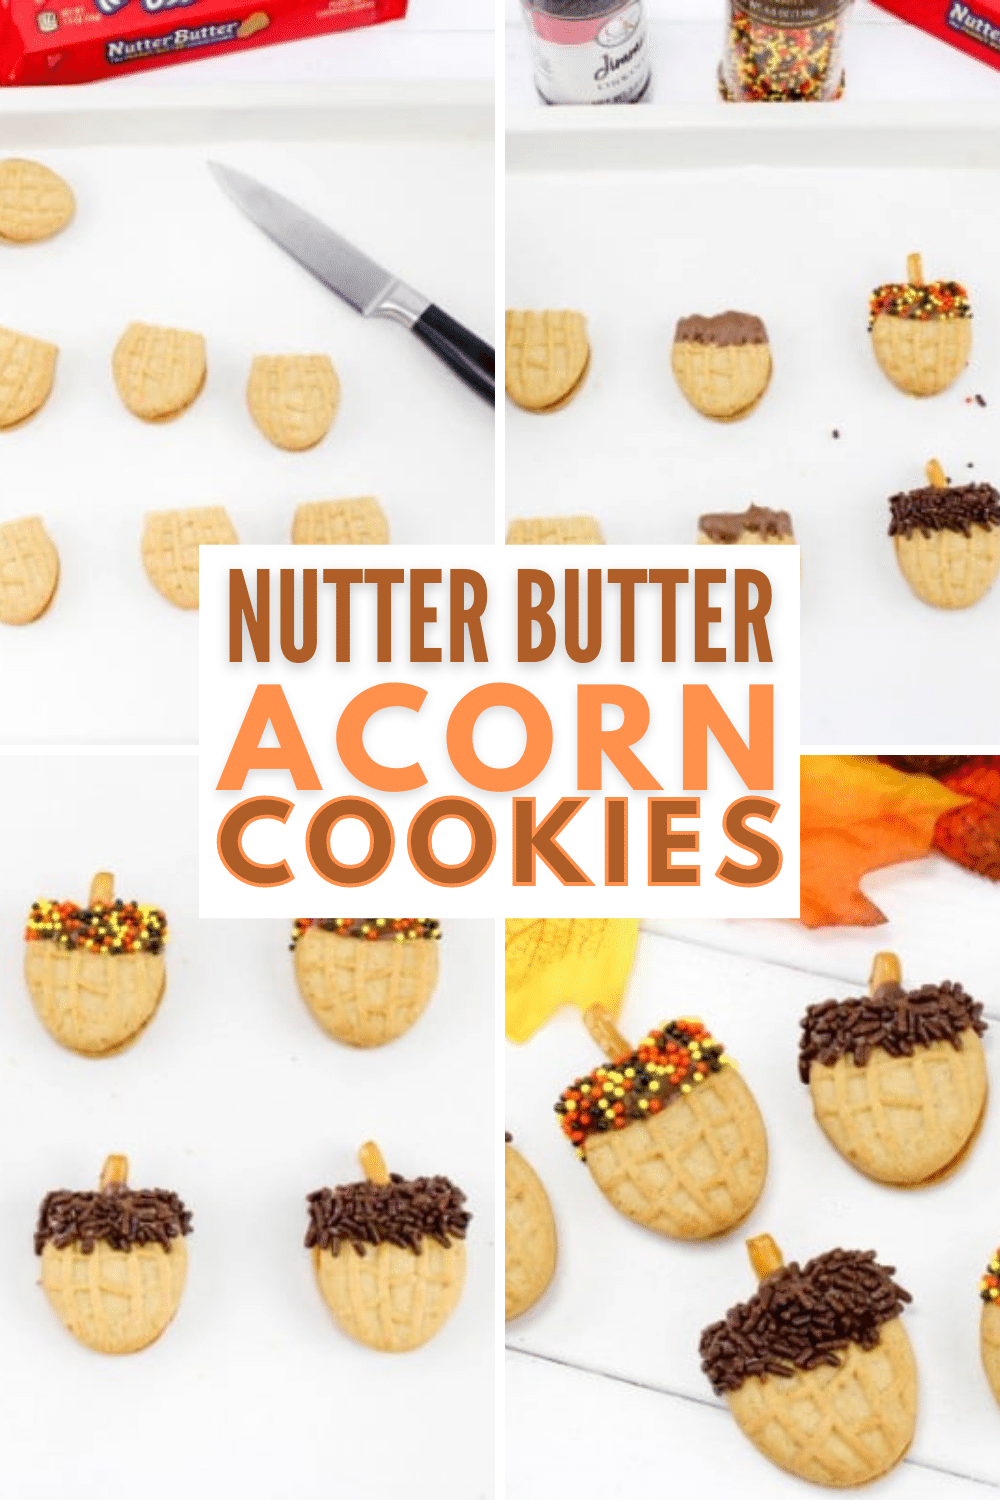 These Nutter Butter Acorn Cookies are perfect for celebrating Fall! Not only are they adorable, they're also so easy to make. #funfood #fallfood #nutterbutter via @wondermomwannab